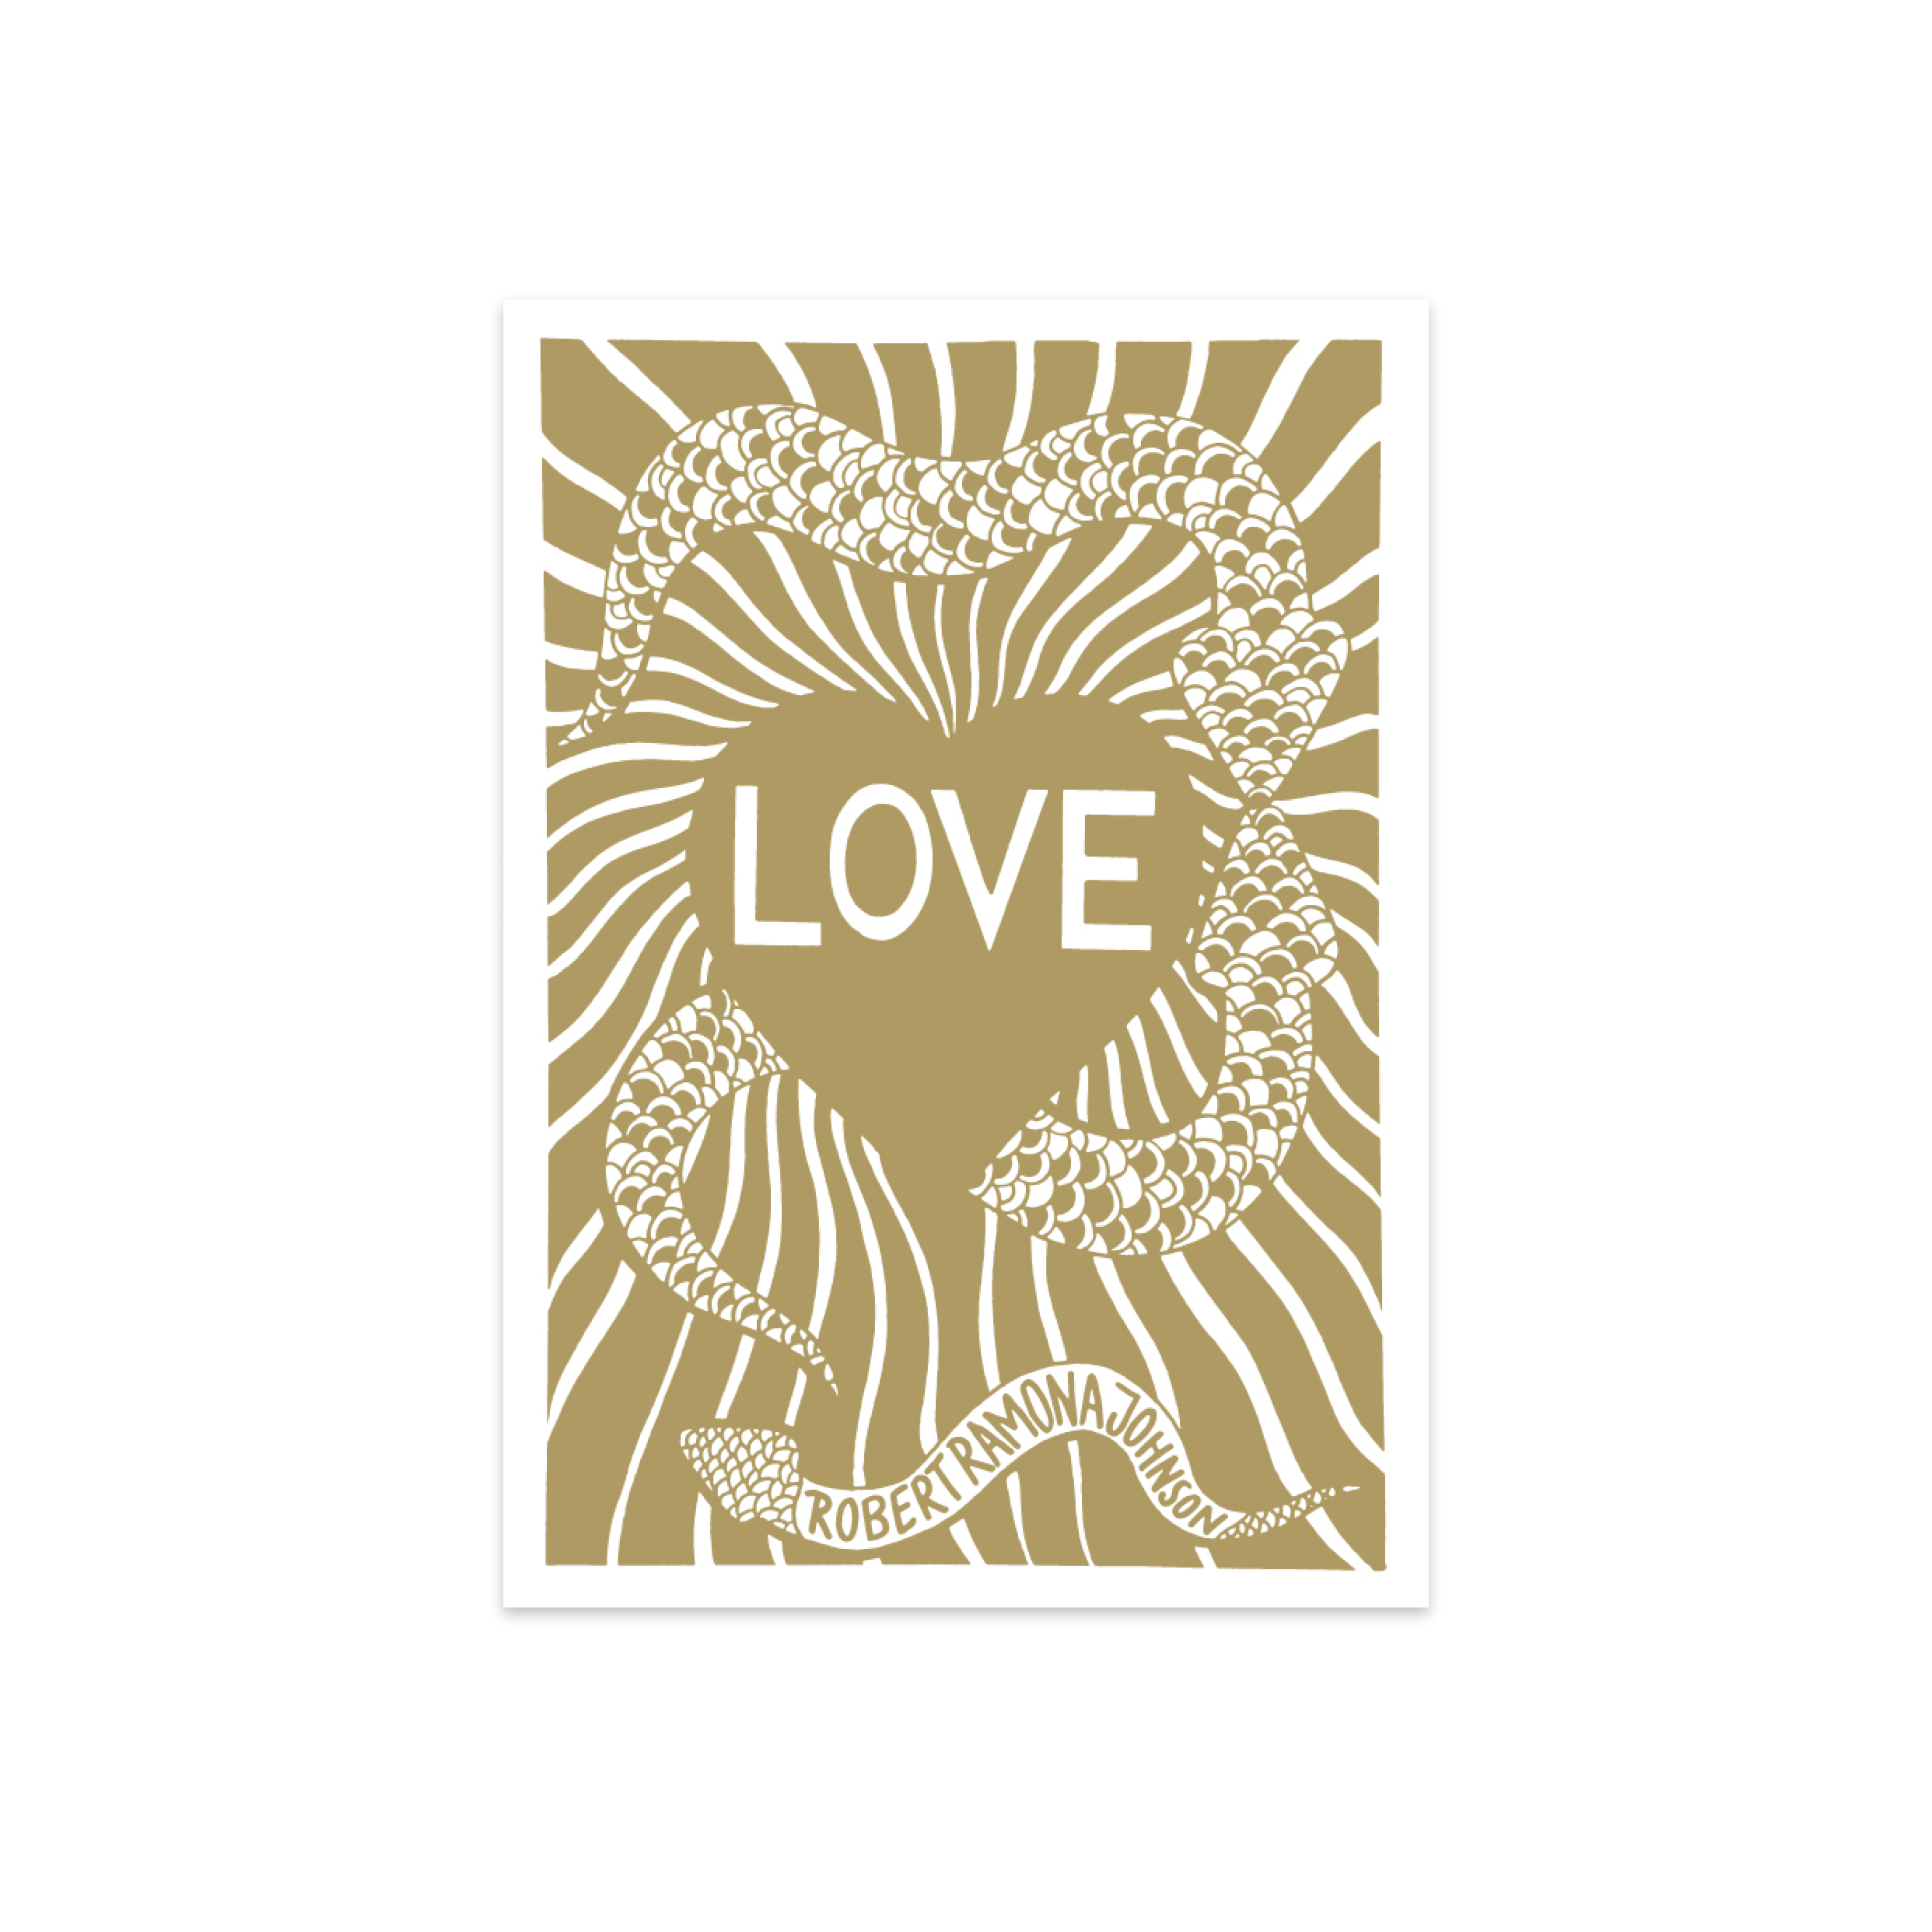 "Love" - Poster - Gold Edition